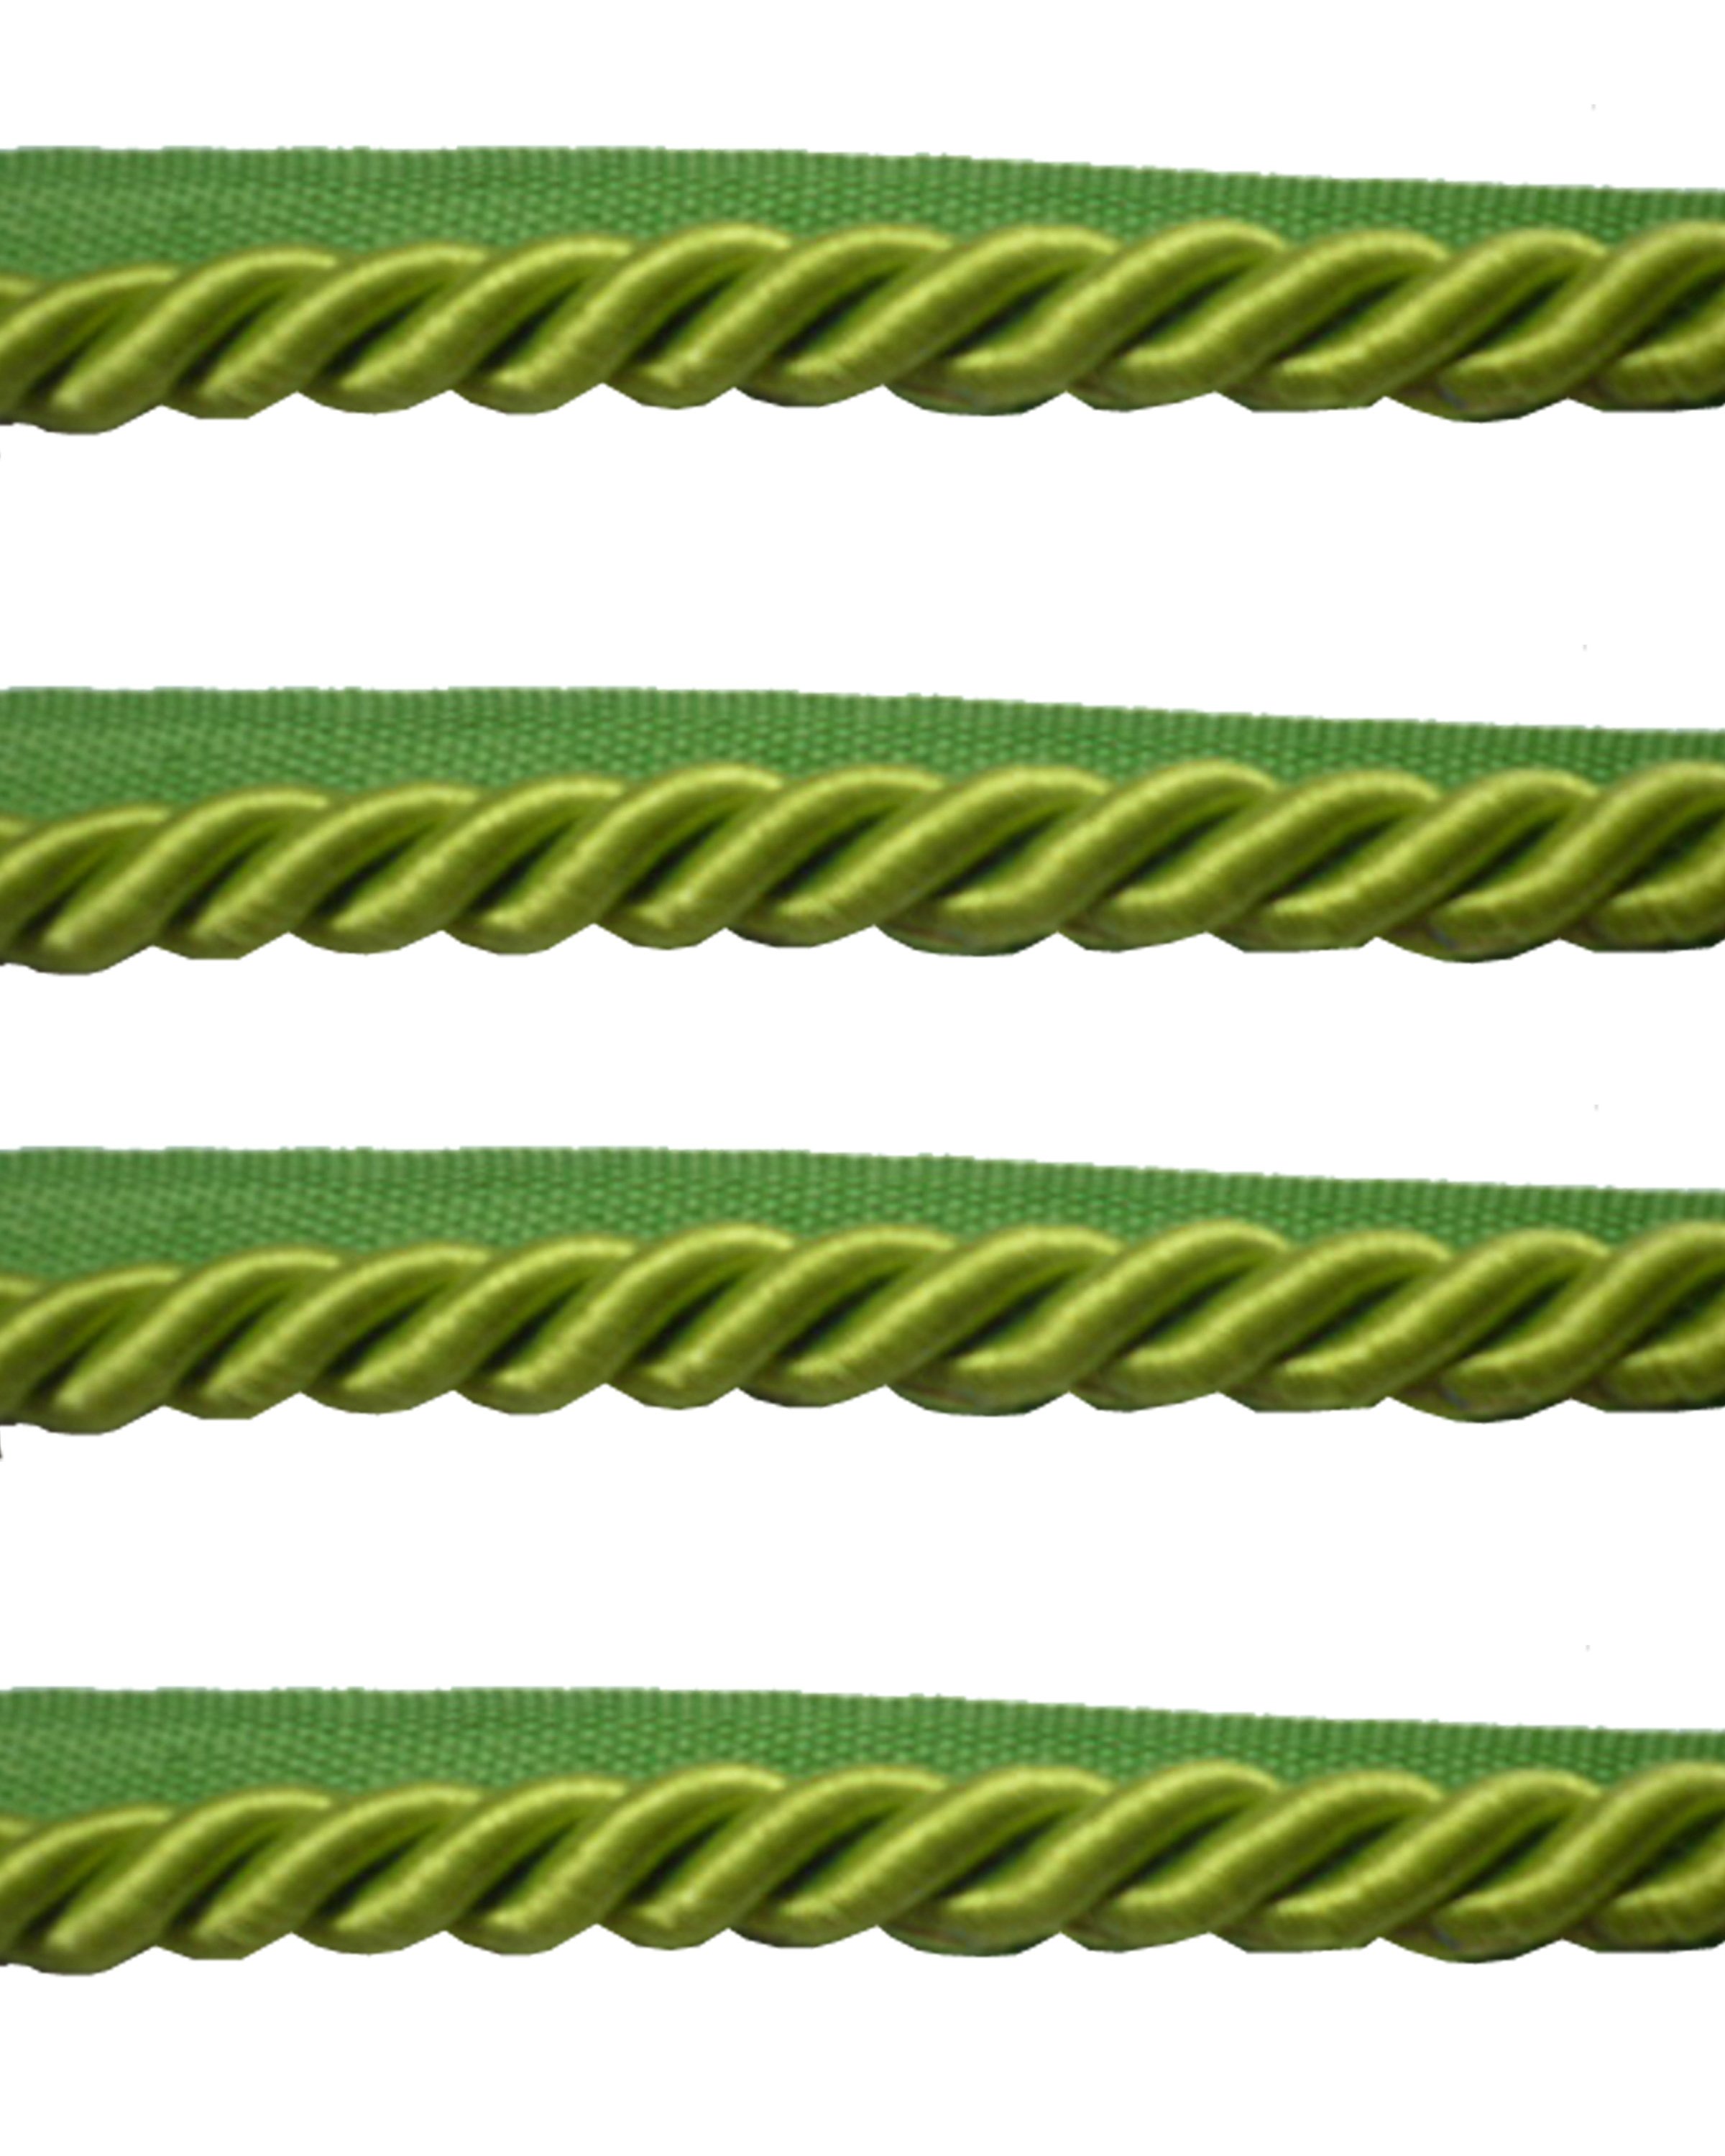 Piping Cord 8mm on Tape - Lime Green Price is for 5 metres